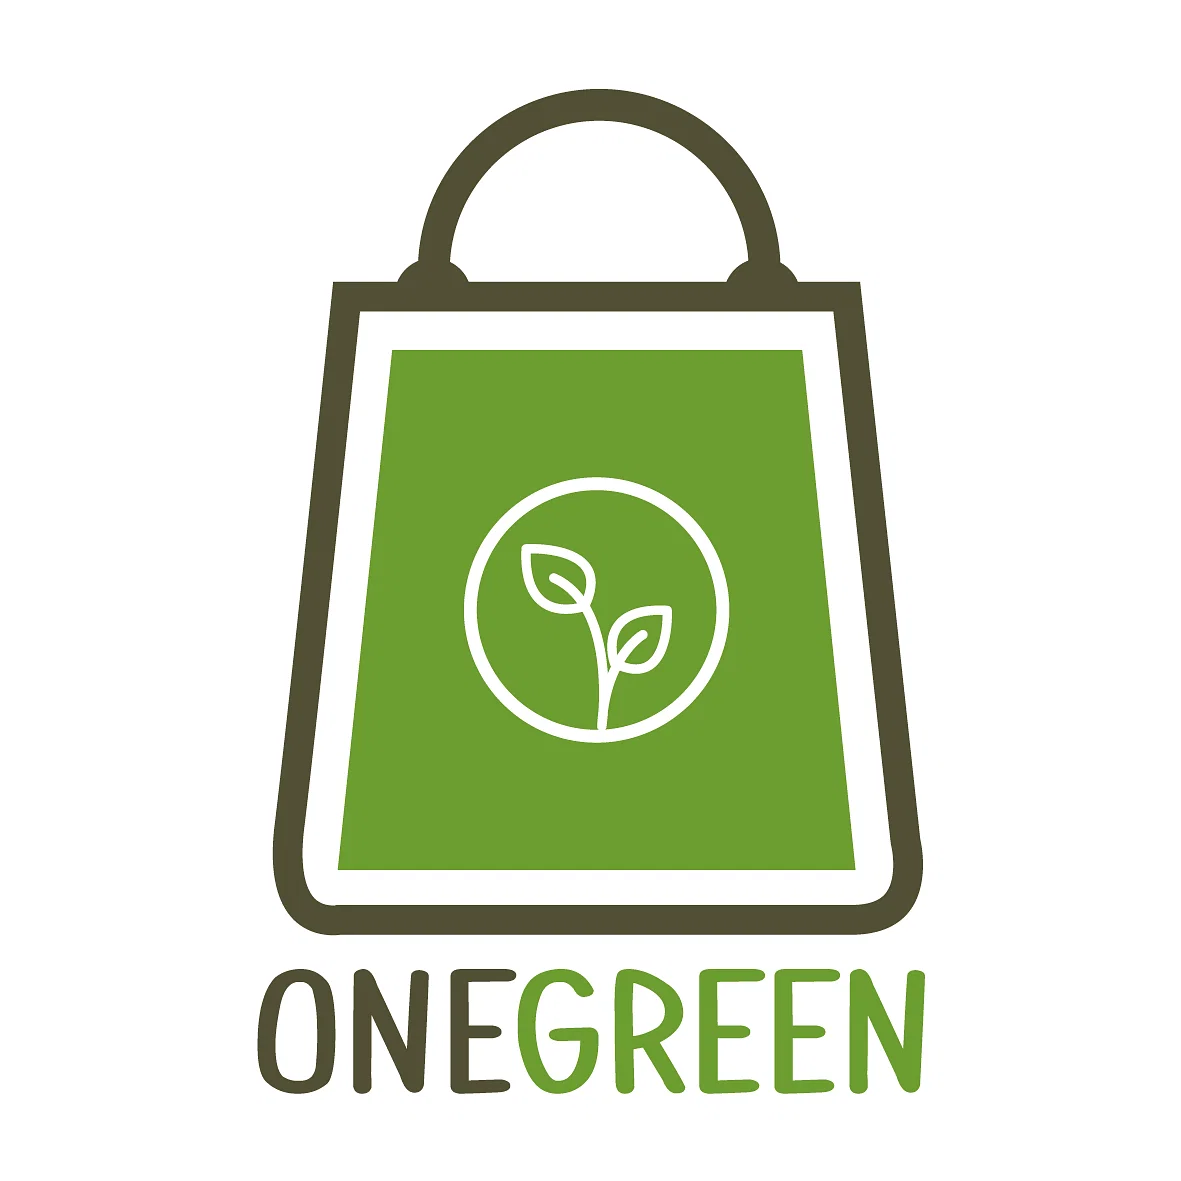 OneGreen Discount: Get Up To 45% OFF + Extra 15% OFF On Sitewide Products